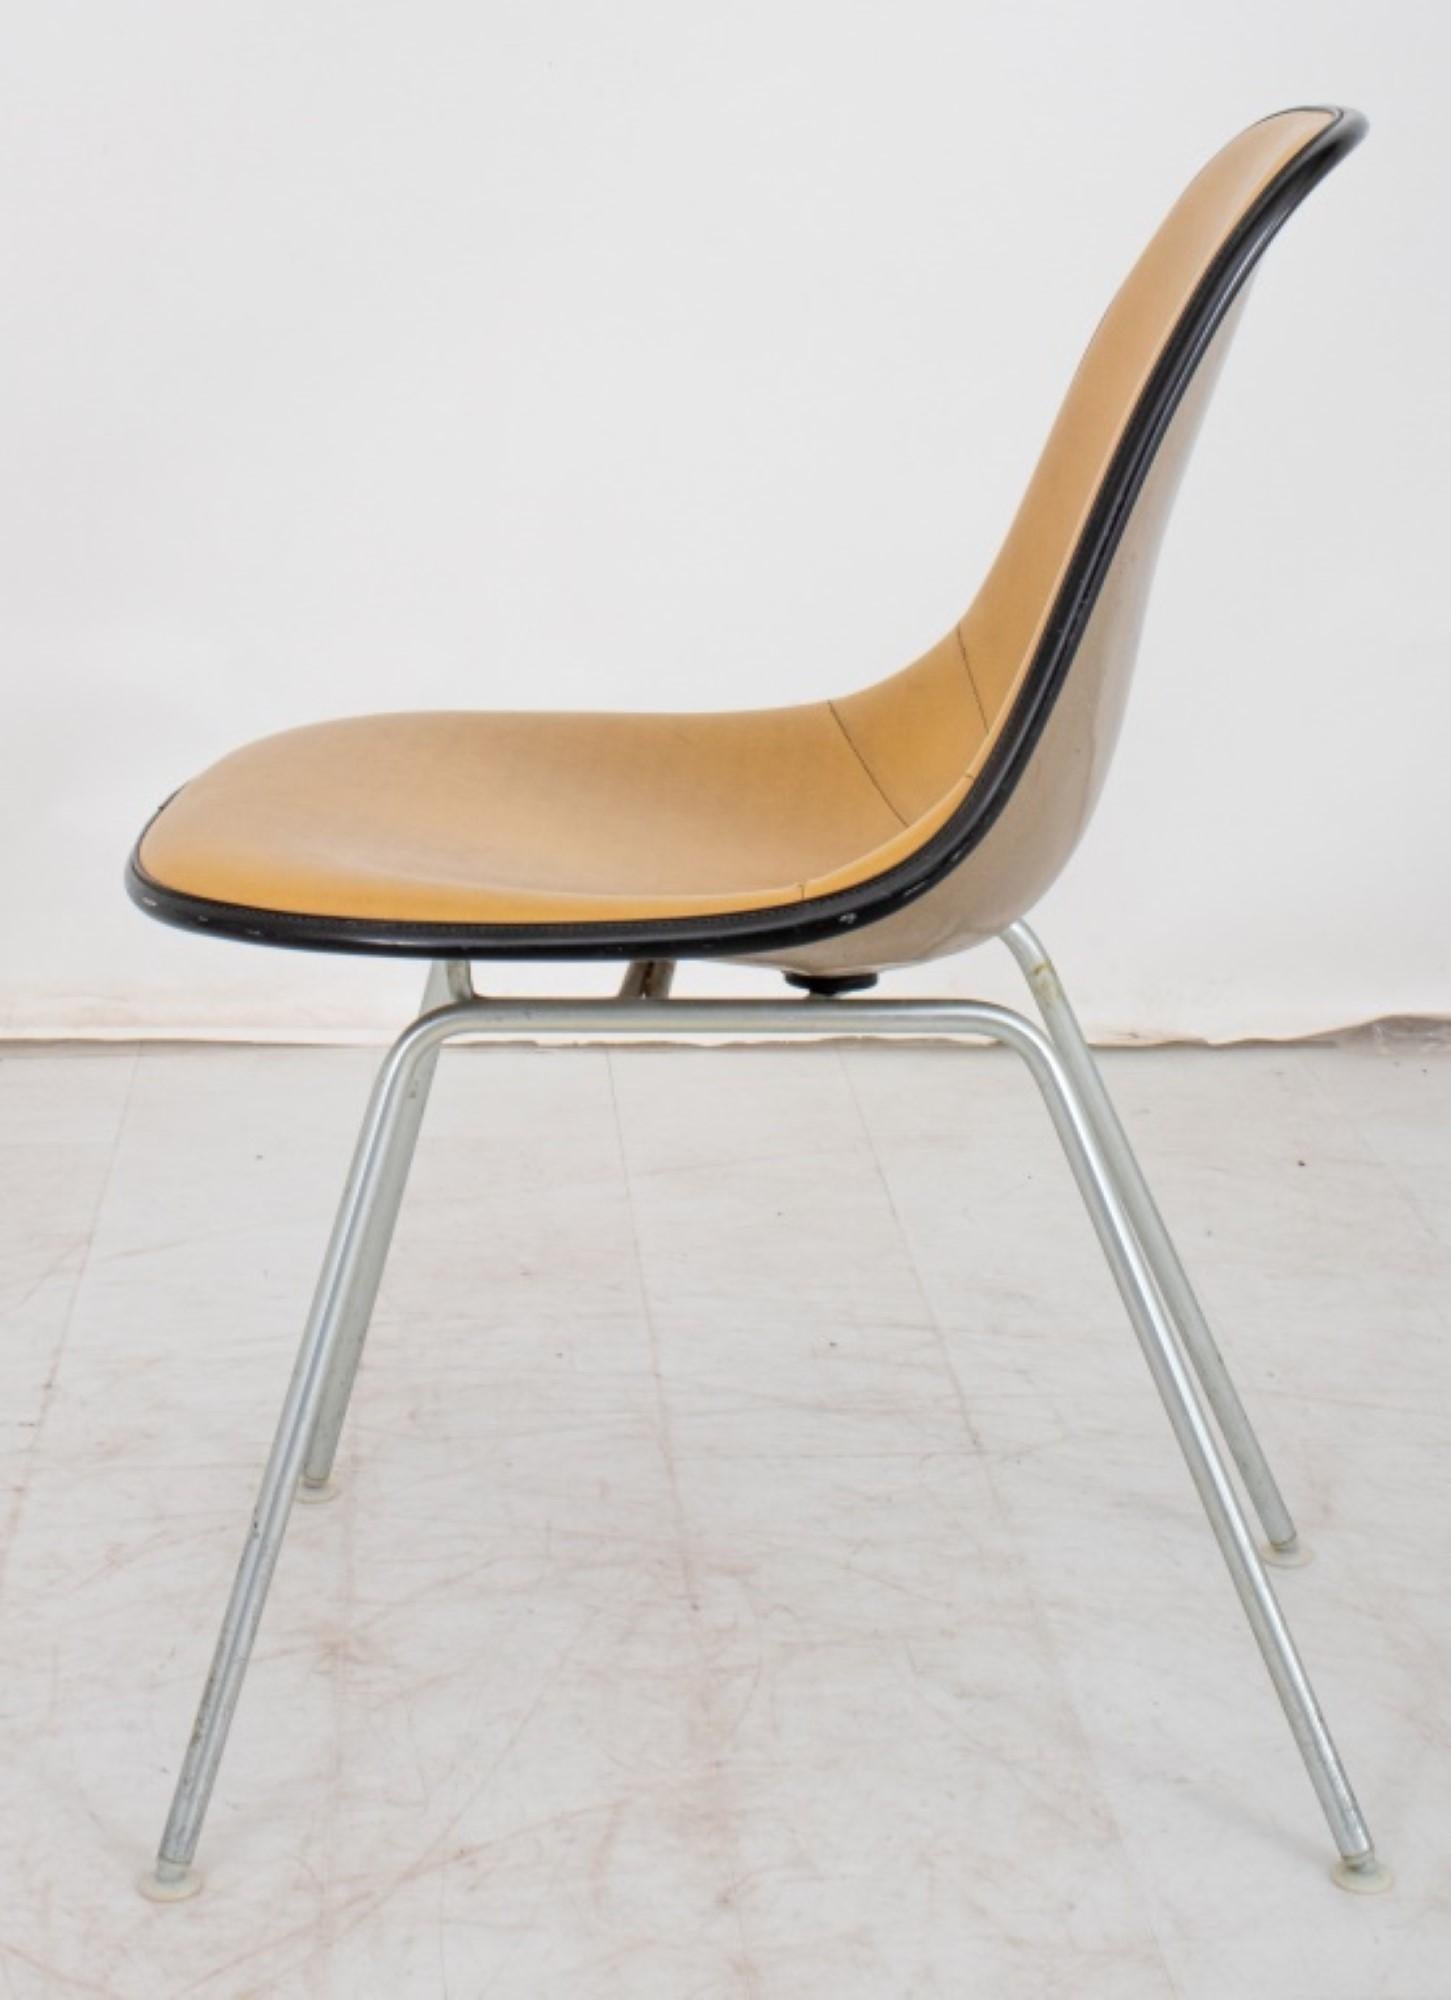 Iconic Seating: Ray and Charles Eames Padded Chair for Herman Miller

Own a piece of design history with this iconic mid-century modern chair, designed by legendary duo Ray and Charles Eames for renowned furniture manufacturer Herman Miller.